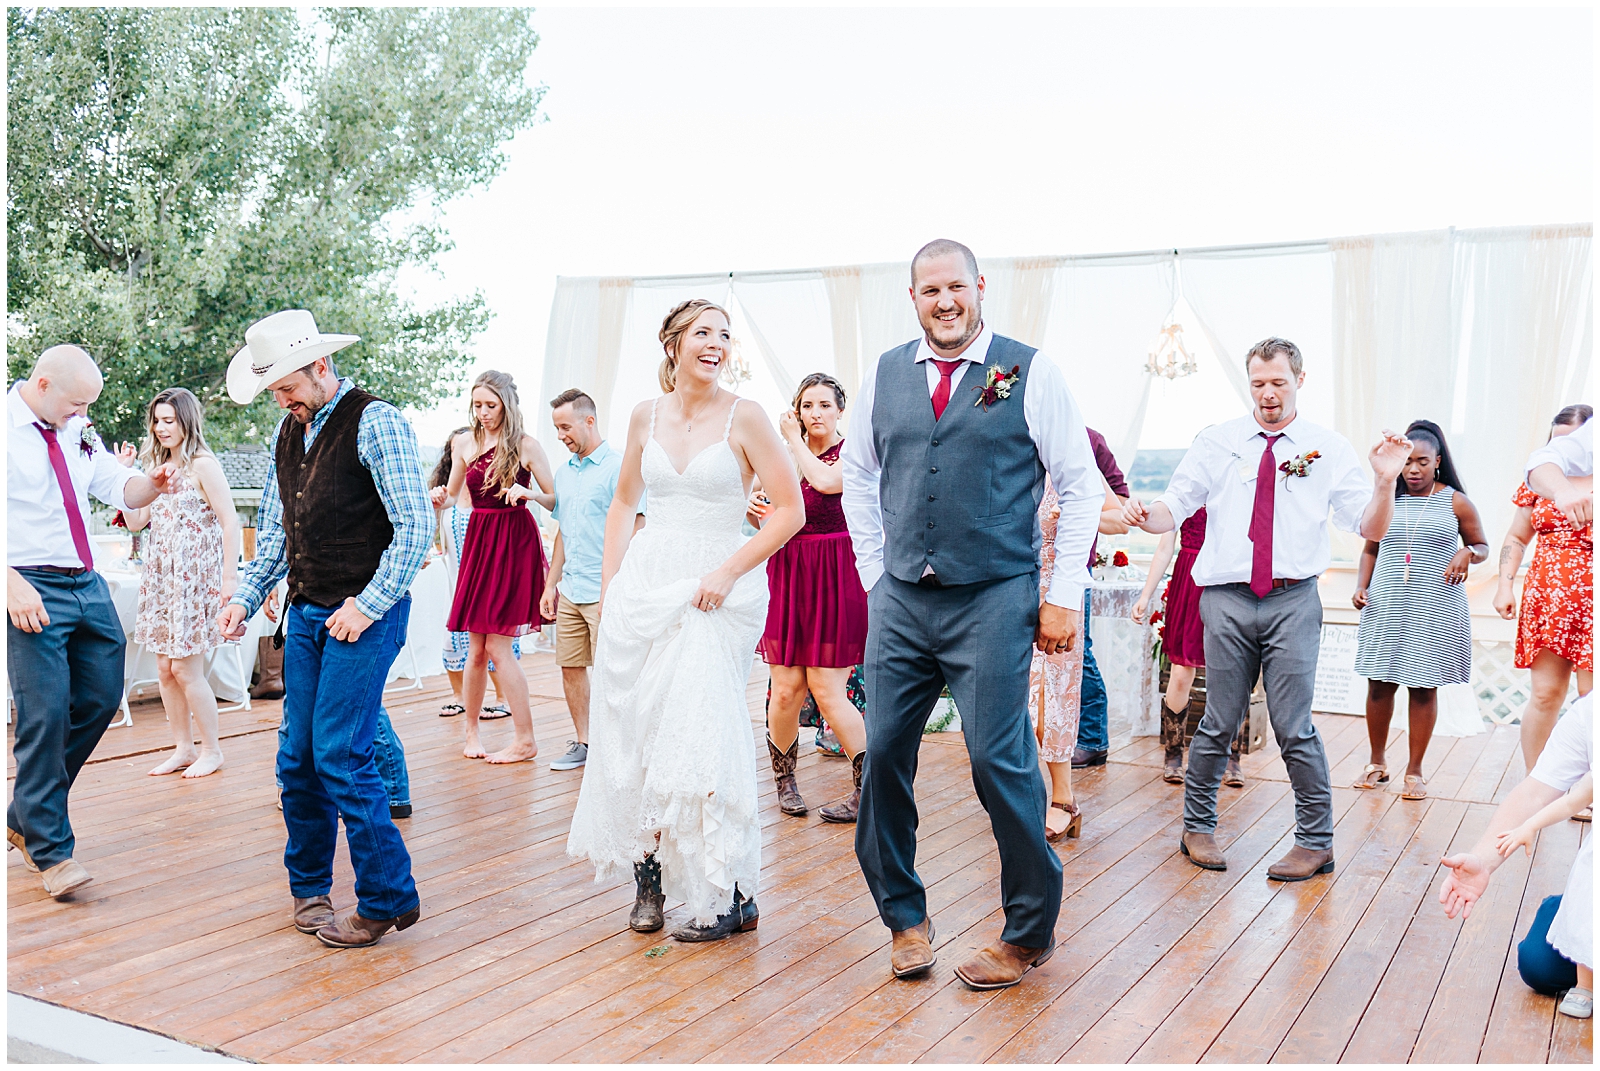 Country Line Dancing at Wedding Reception